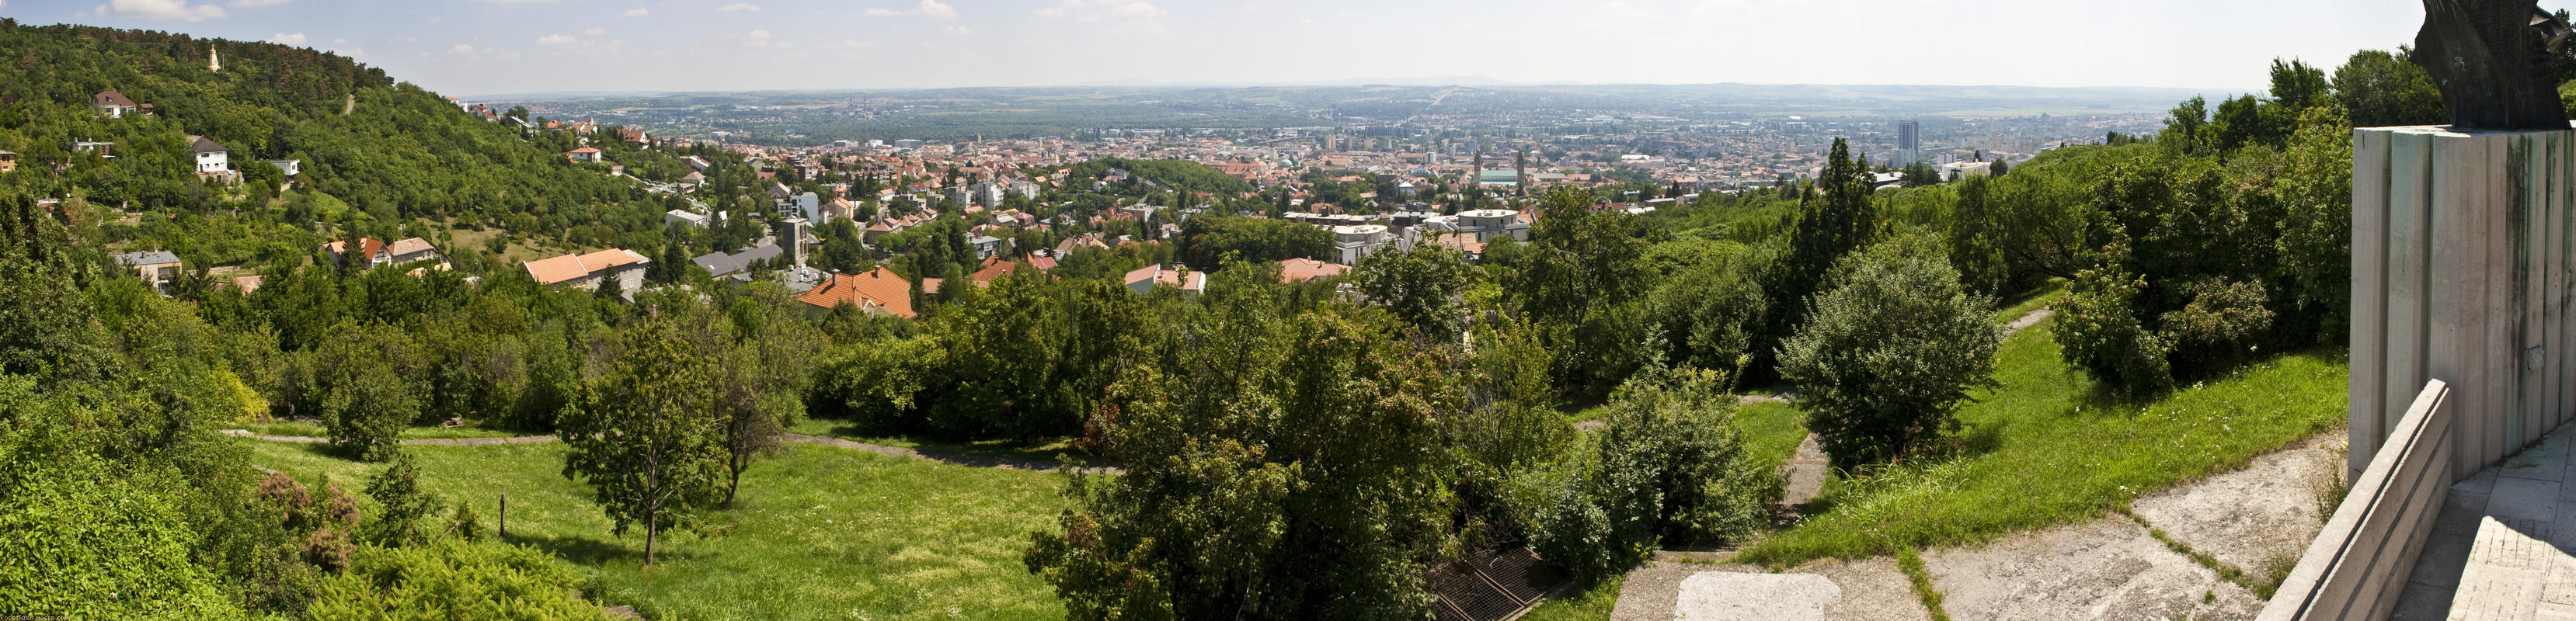 ﻿Pécs. View over the culture capital of Hungary.